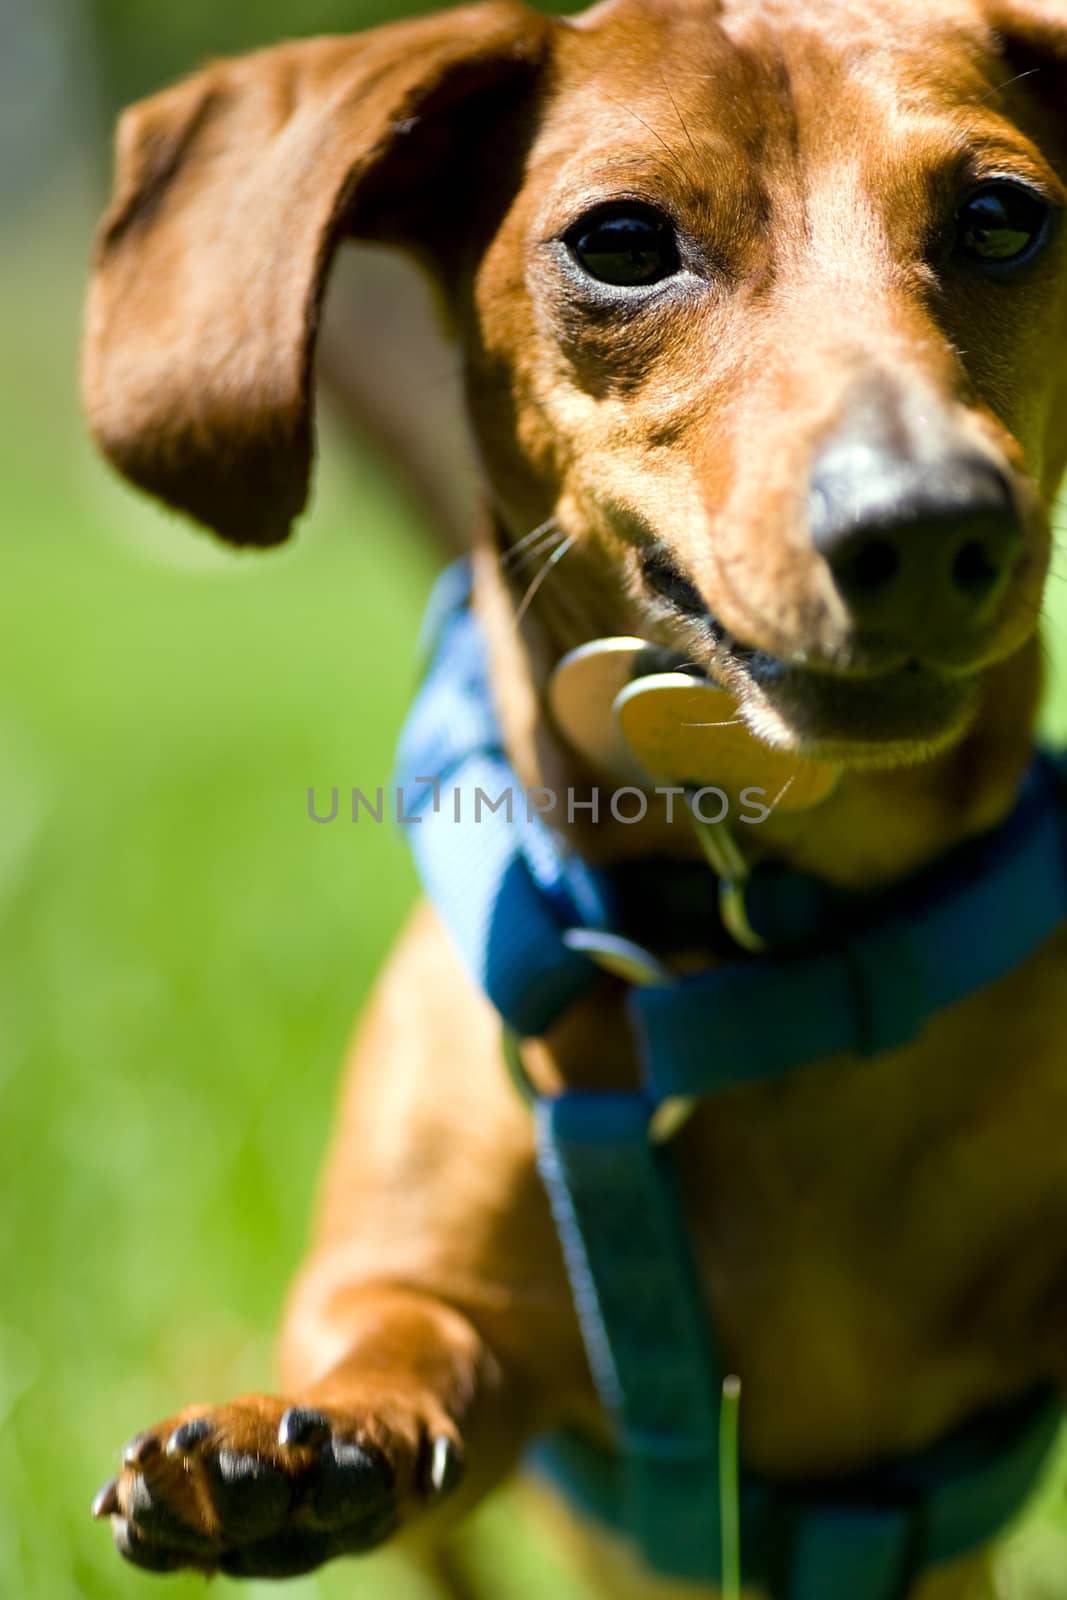 Closeup of a miniature Dachshund as it jumps up towards the camera.